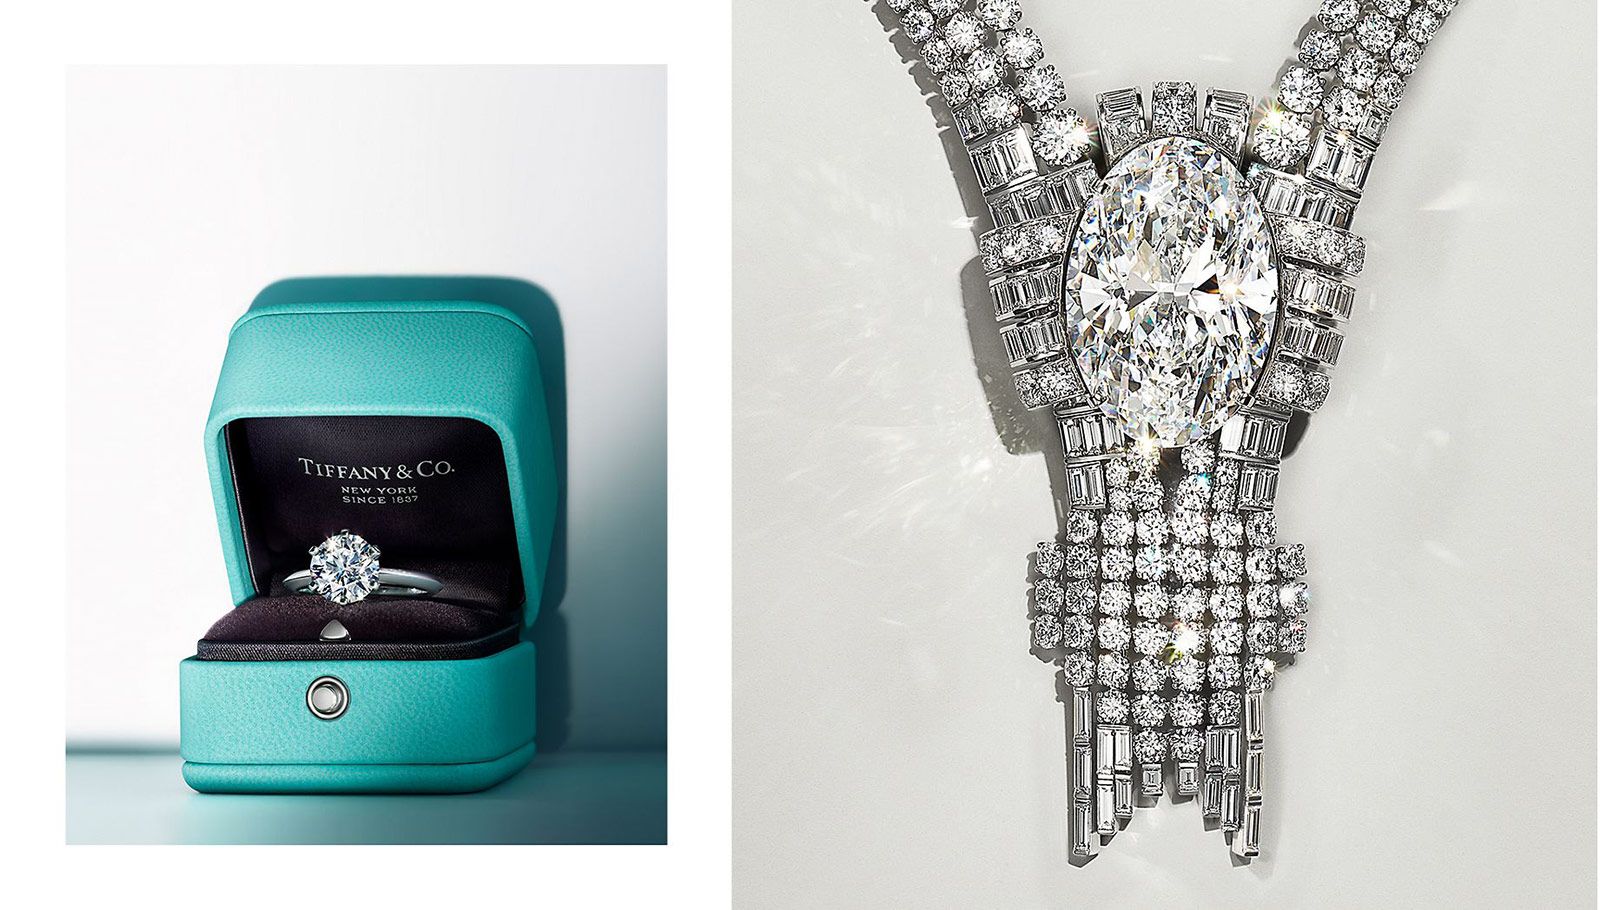 Left: Tiffany&Co engagement ring with the Tiffany setting. Right: Tiffany&Co diamond necklace withType IIa oval diamond of over 80 cts